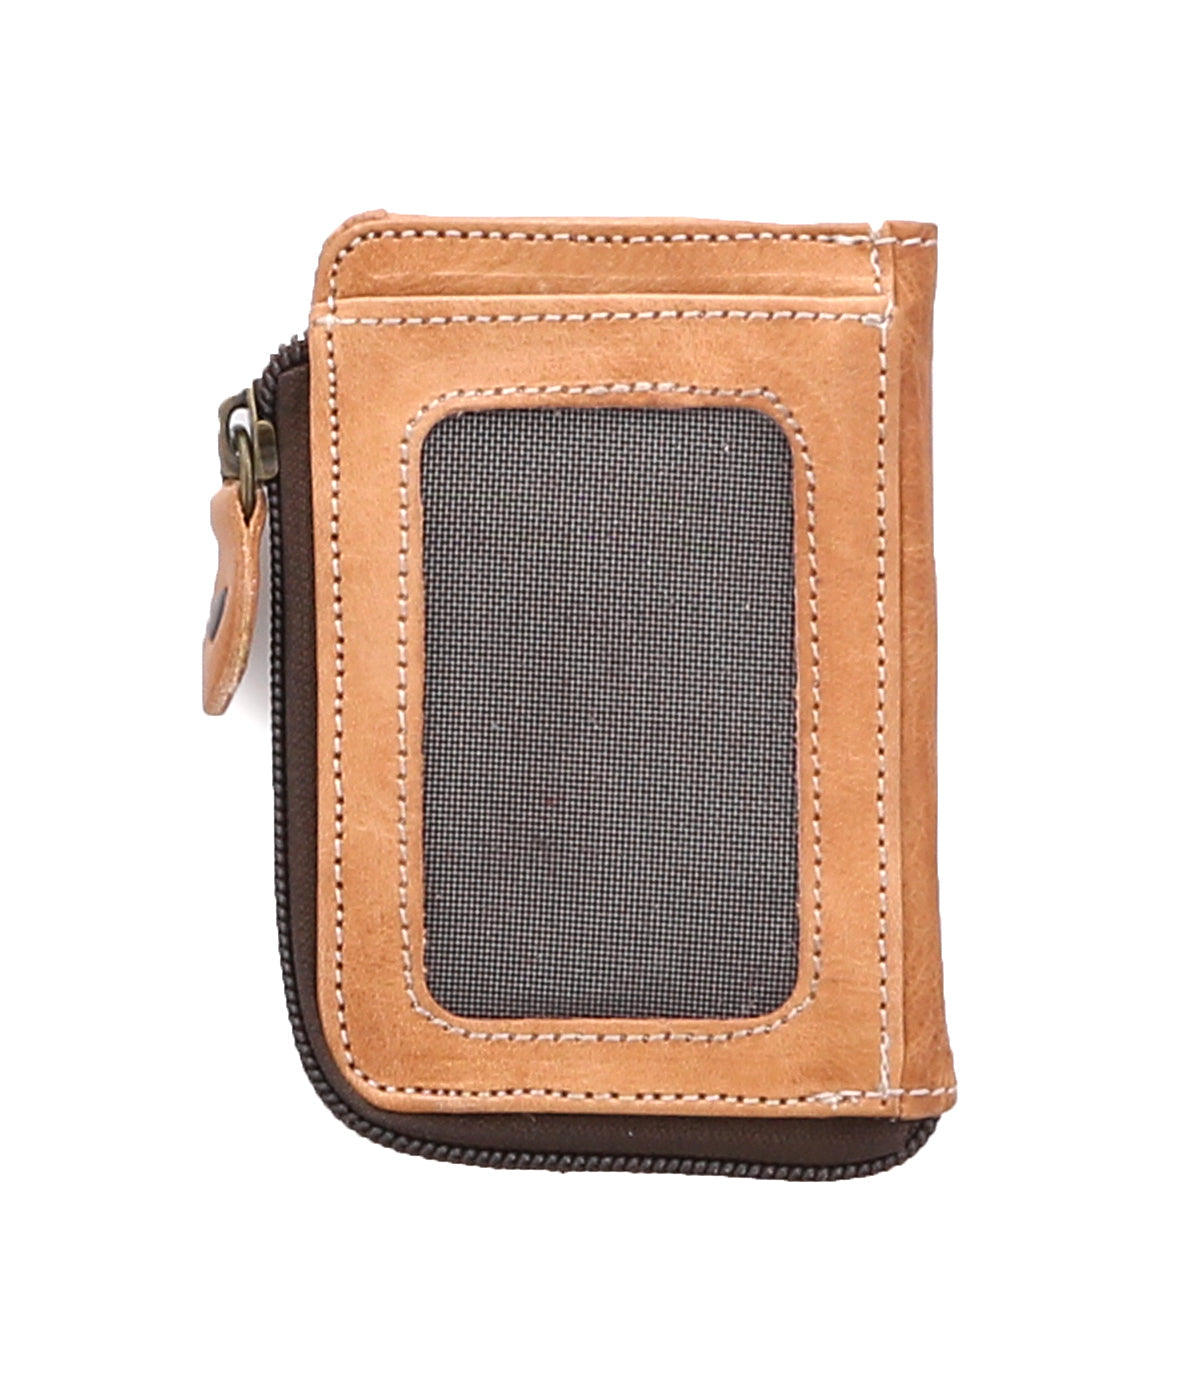 Bed Stu Carrie Compact Wallet